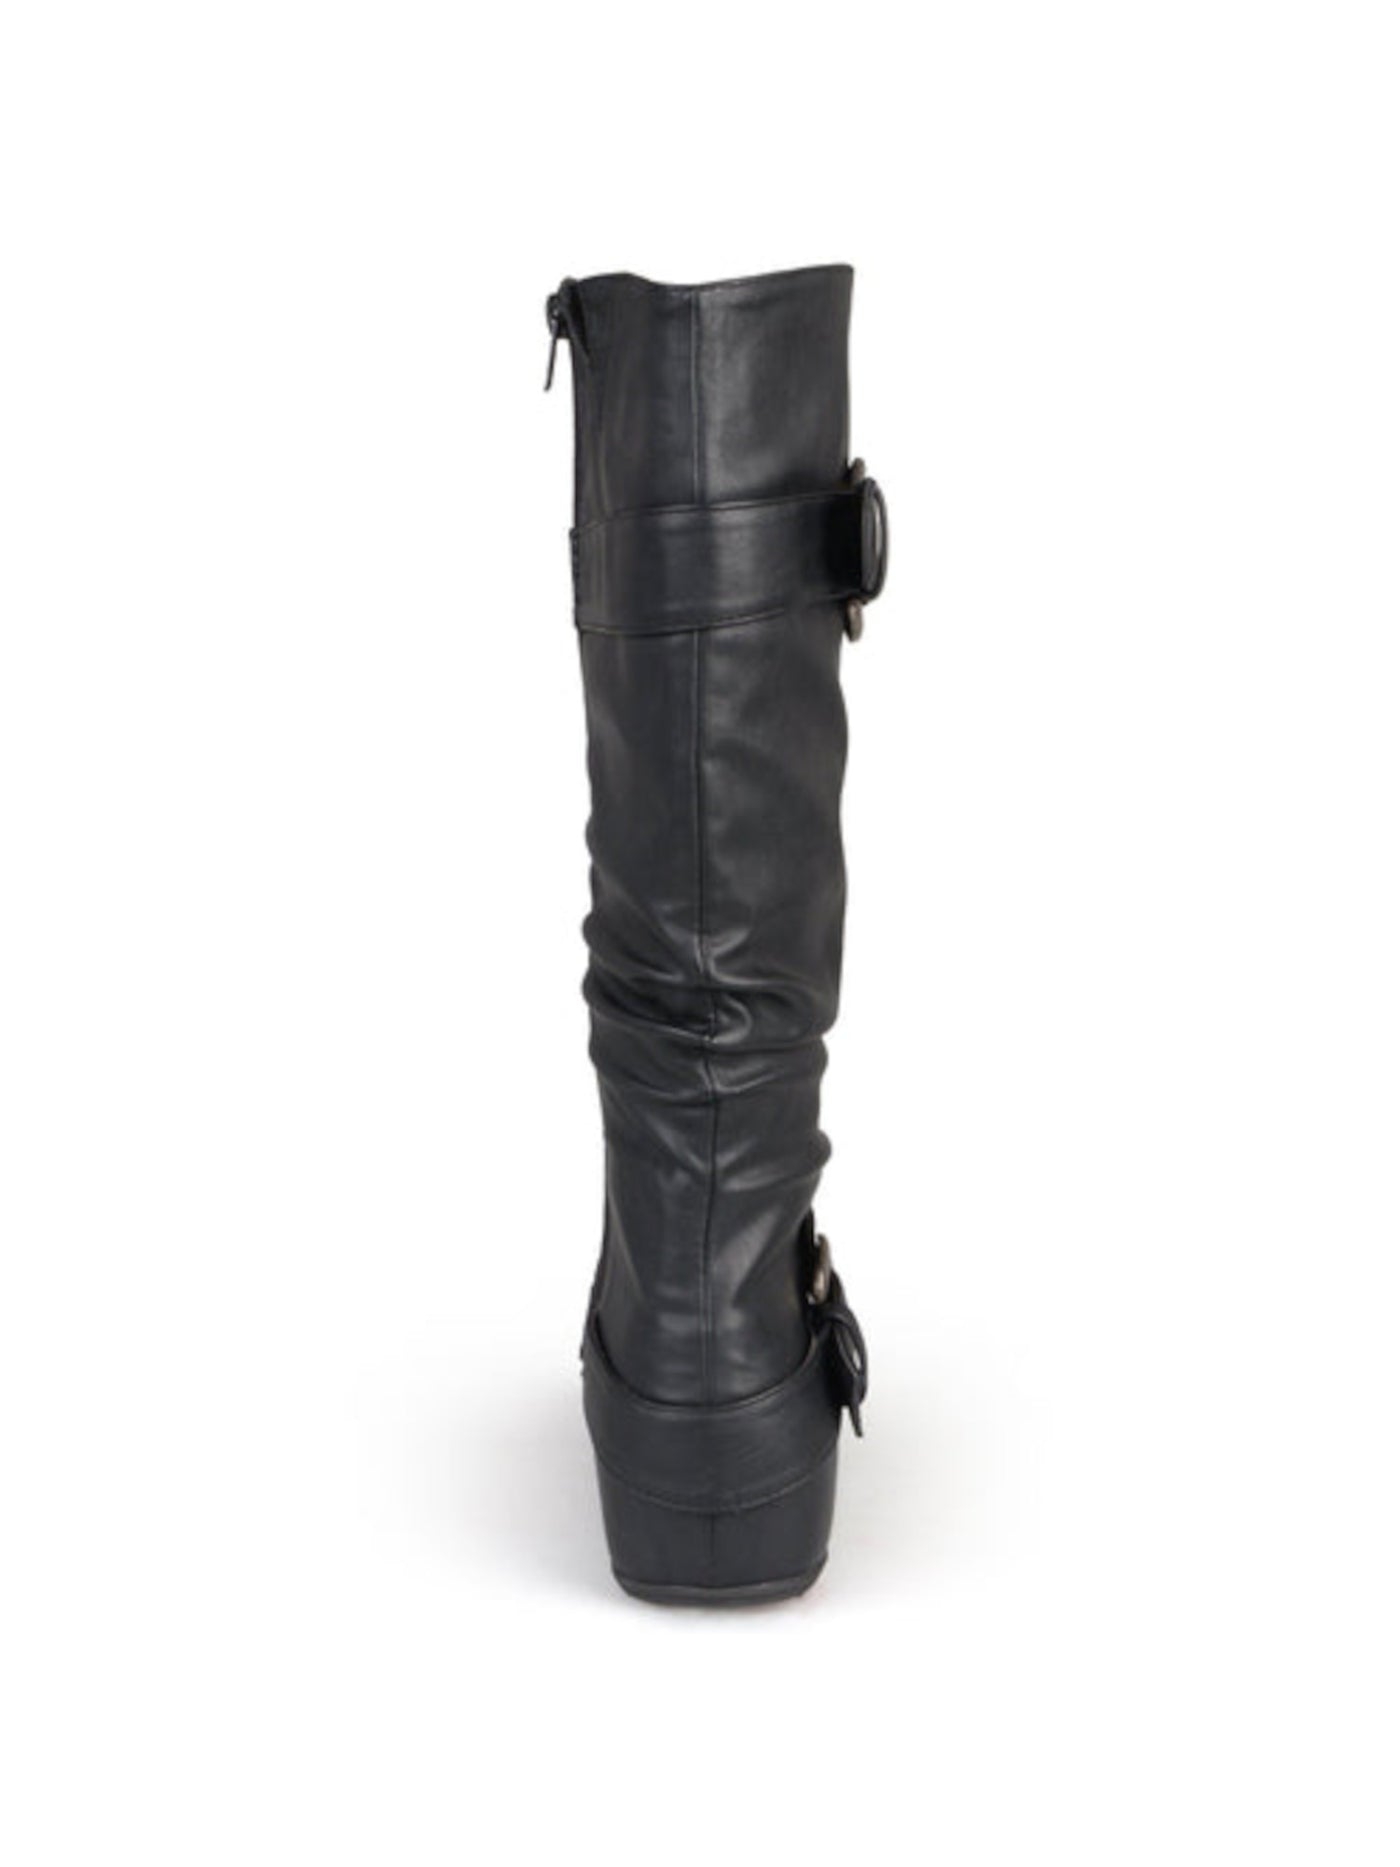 JOURNEE COLLECTION Womens Black Buckle Accent Cushioned Hidden Heel Paris Round Toe Wedge Zip-Up Slouch Boot 7.5